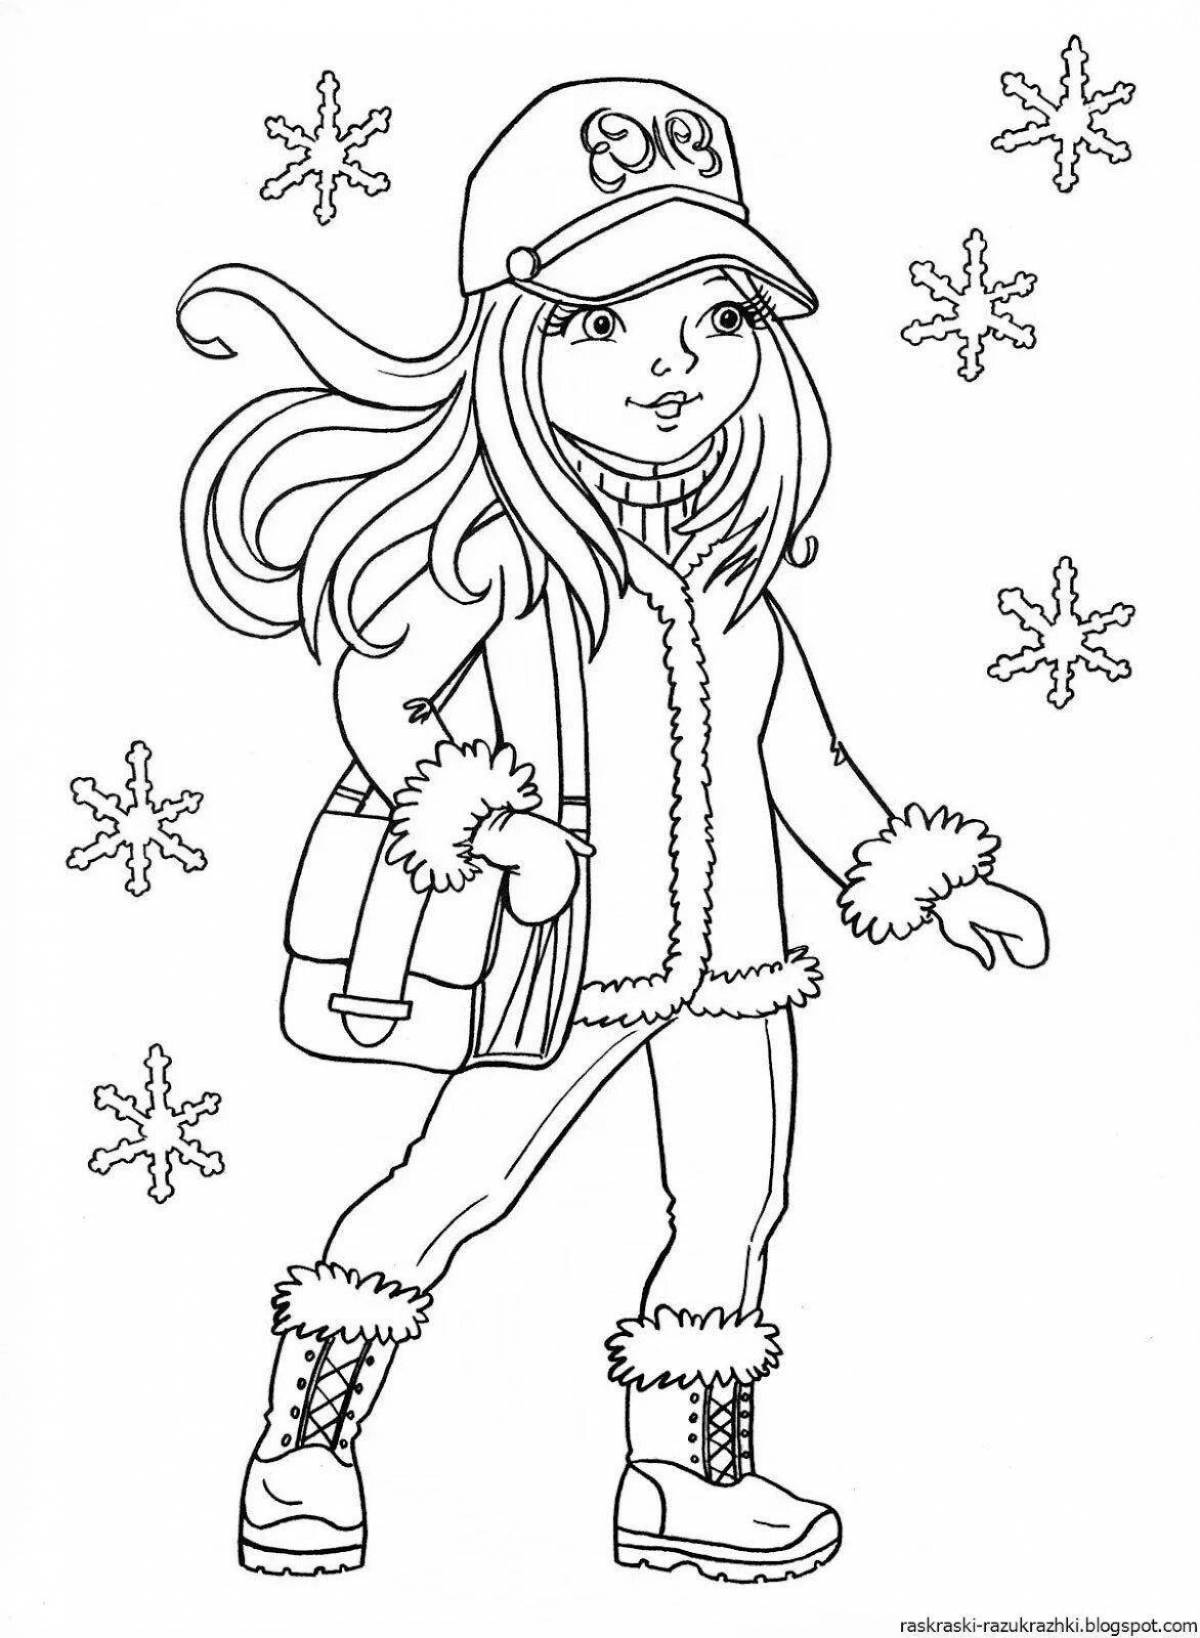 Exciting coloring page 12 for girls